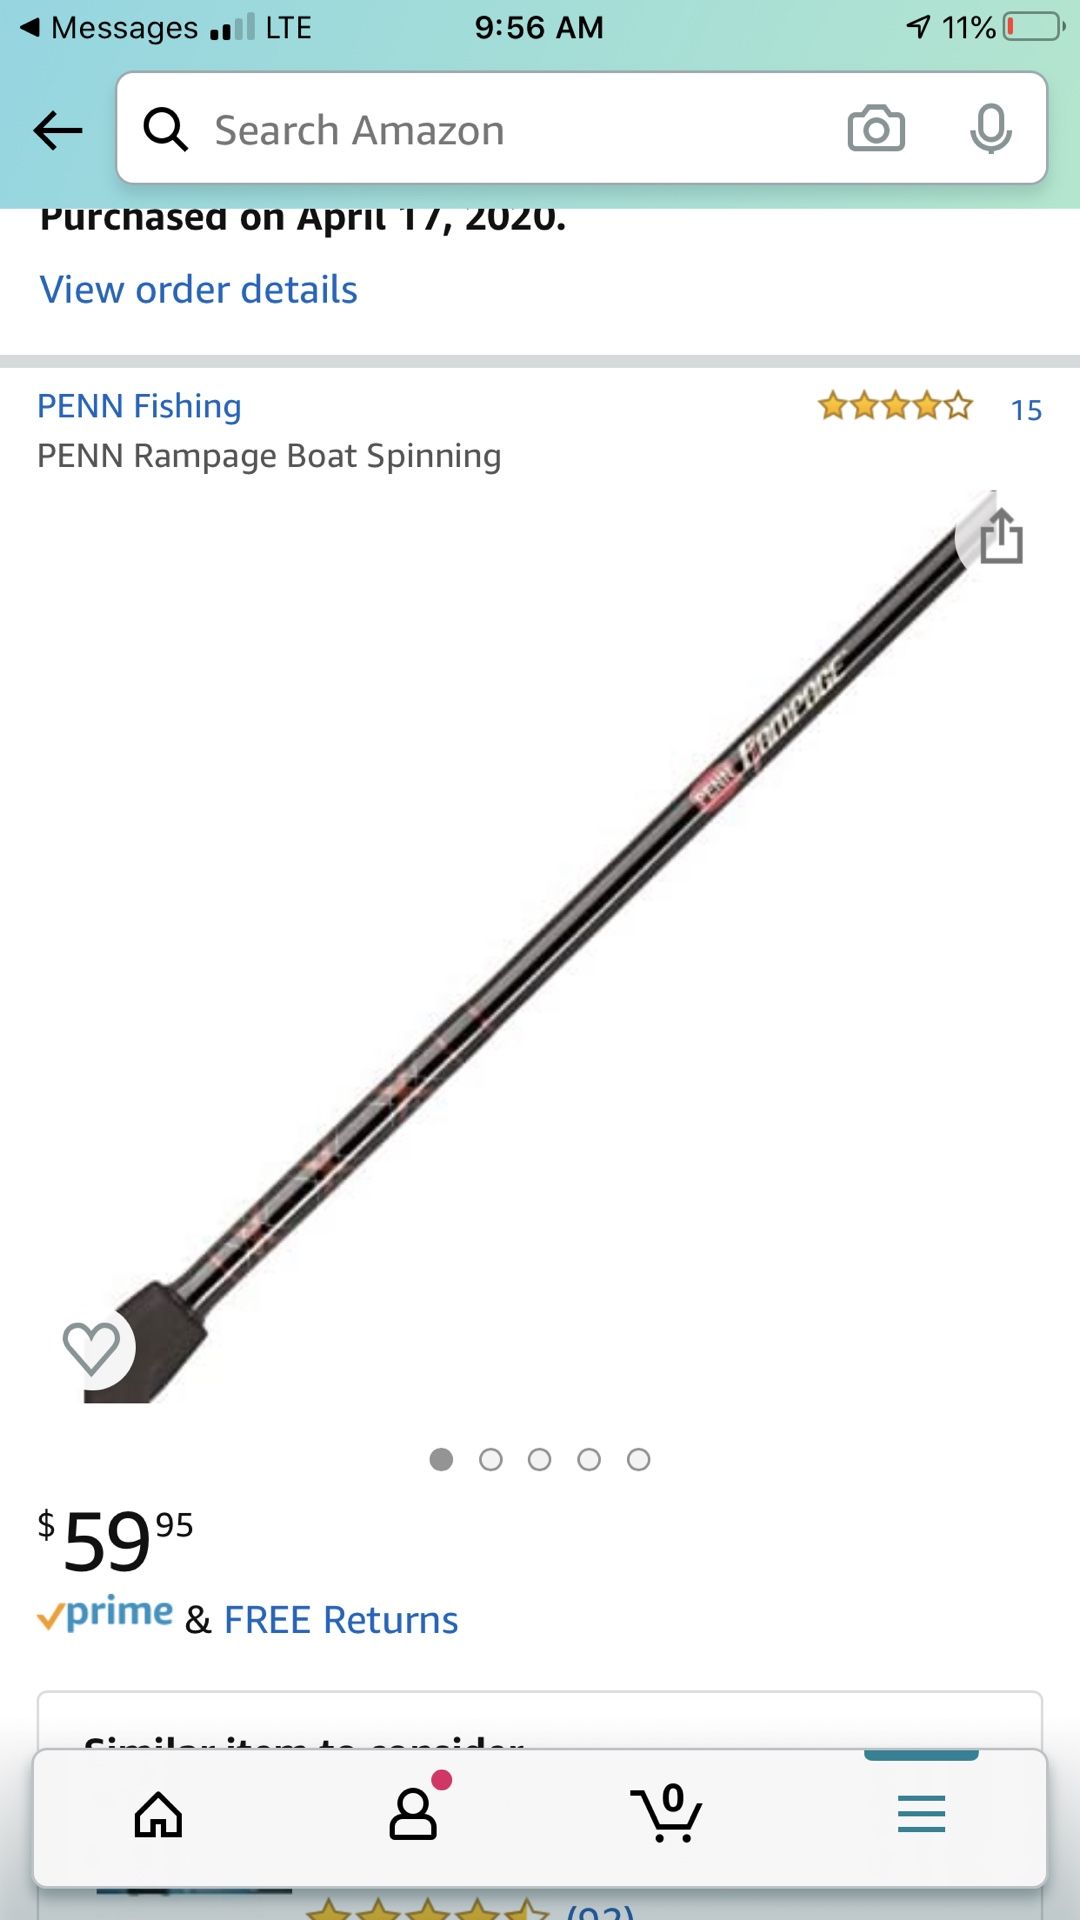 Penn rampage boat spinning Fishing rod new never use